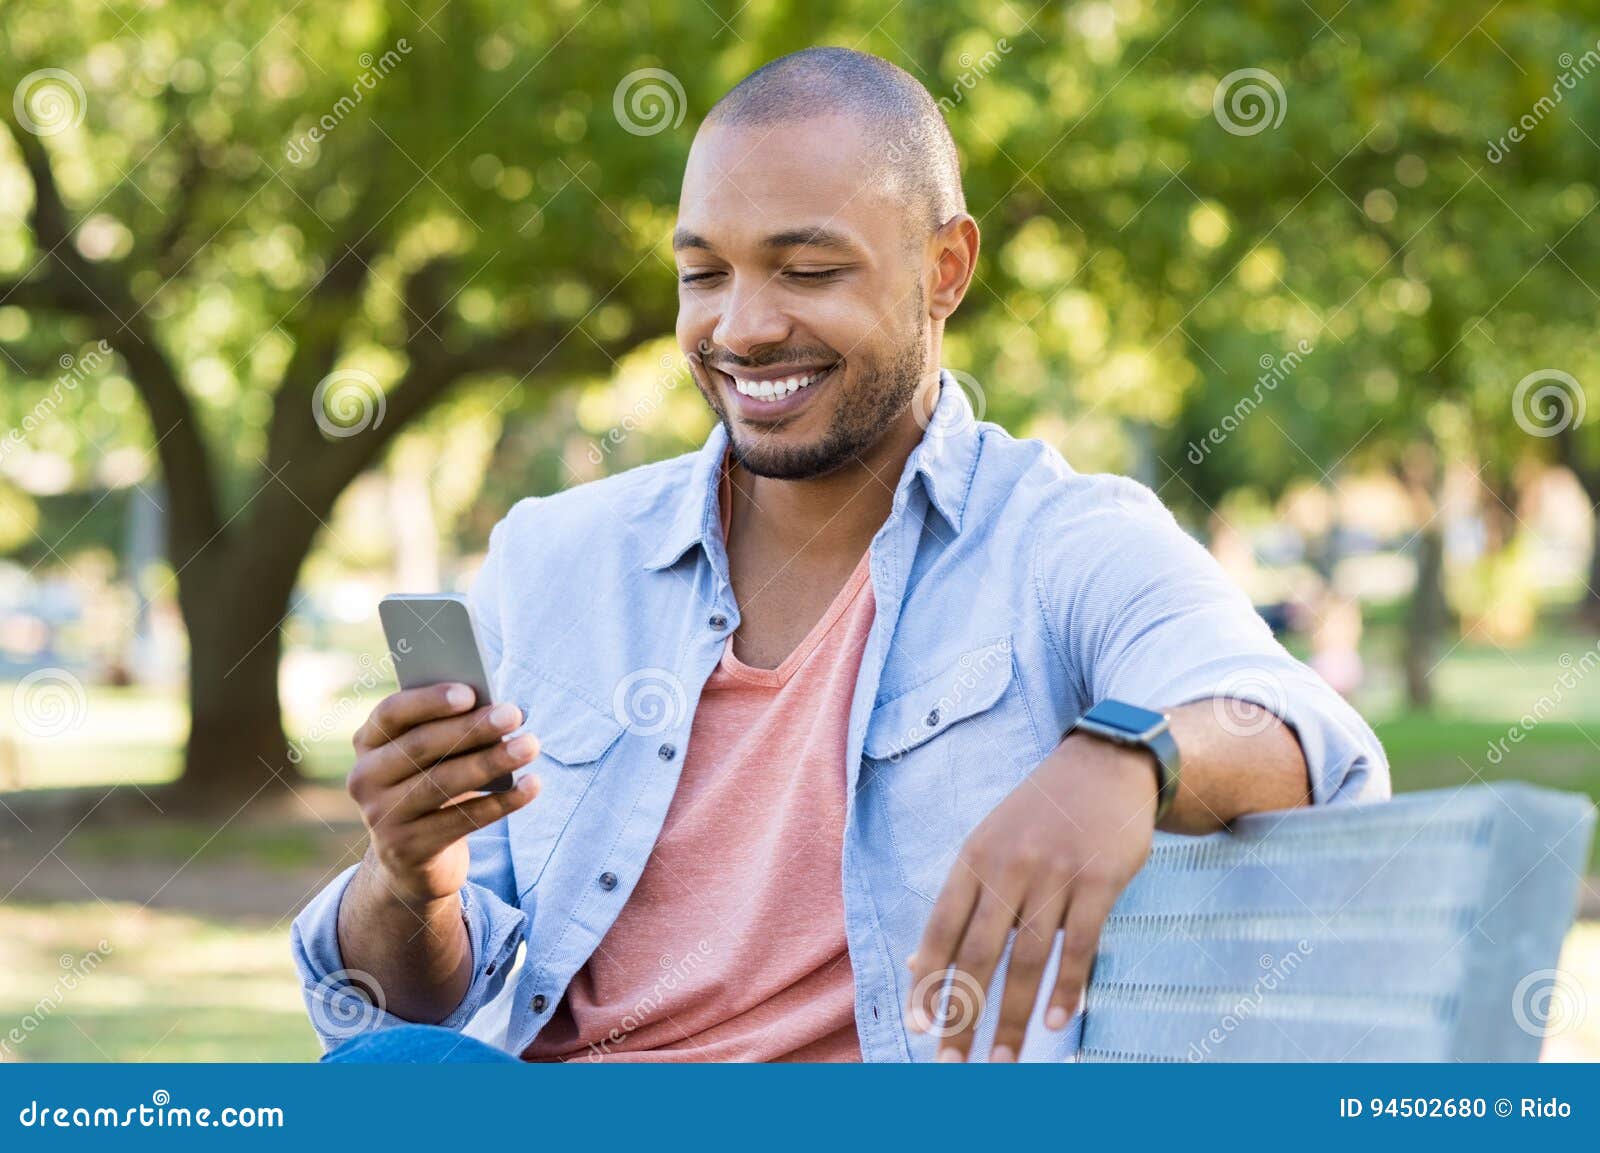 Smiling African Boy Playing Online Games in Class Stock Photo - Image of  phone, modern: 177228872